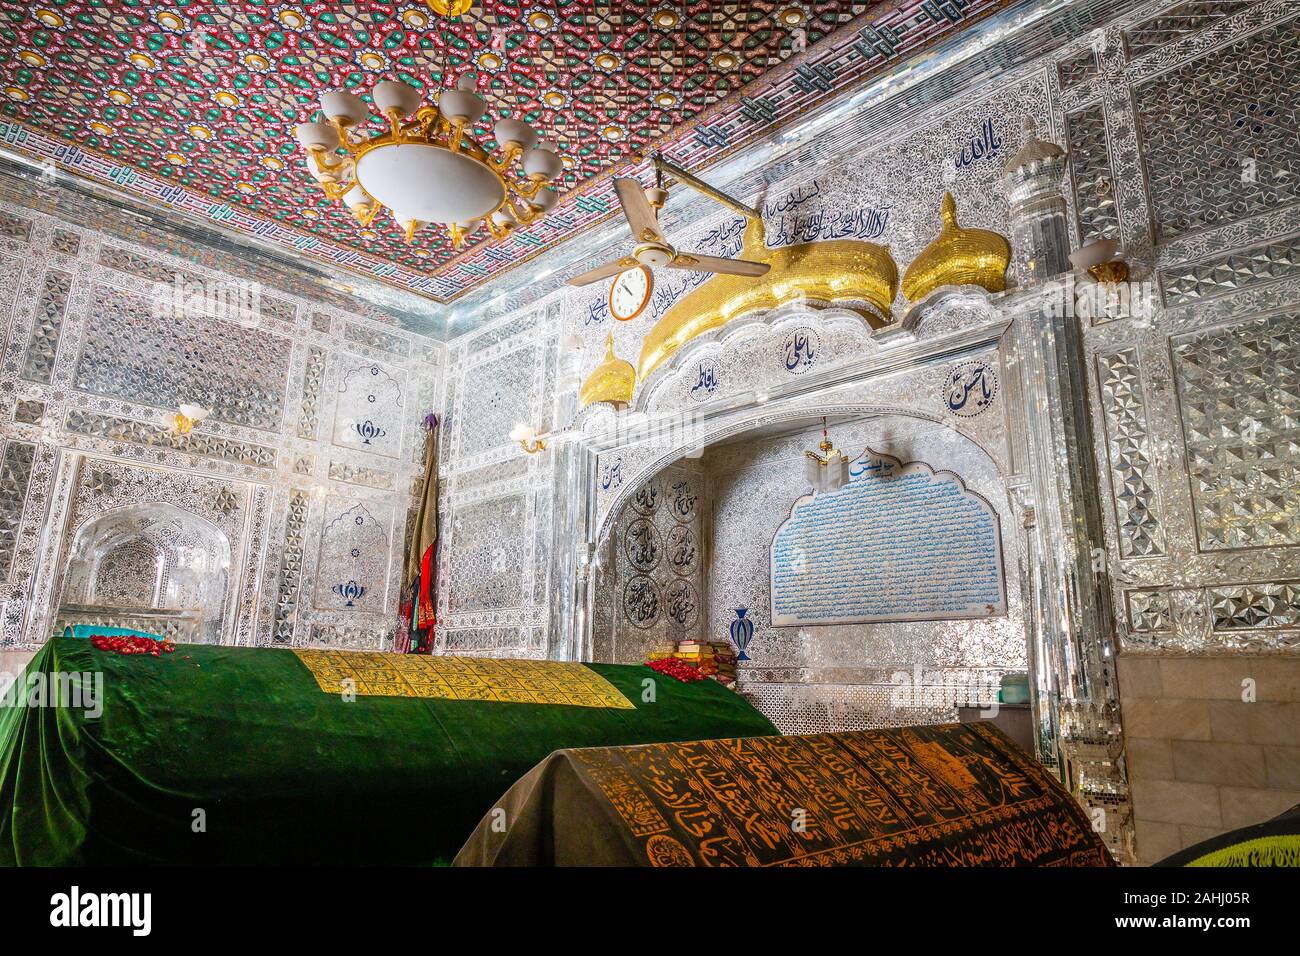 Multan Darbar Hazrat Yousaf Shah Gardez Tomb Picturesque Interior View on a Sunny Blue Sky Day Stock Photo